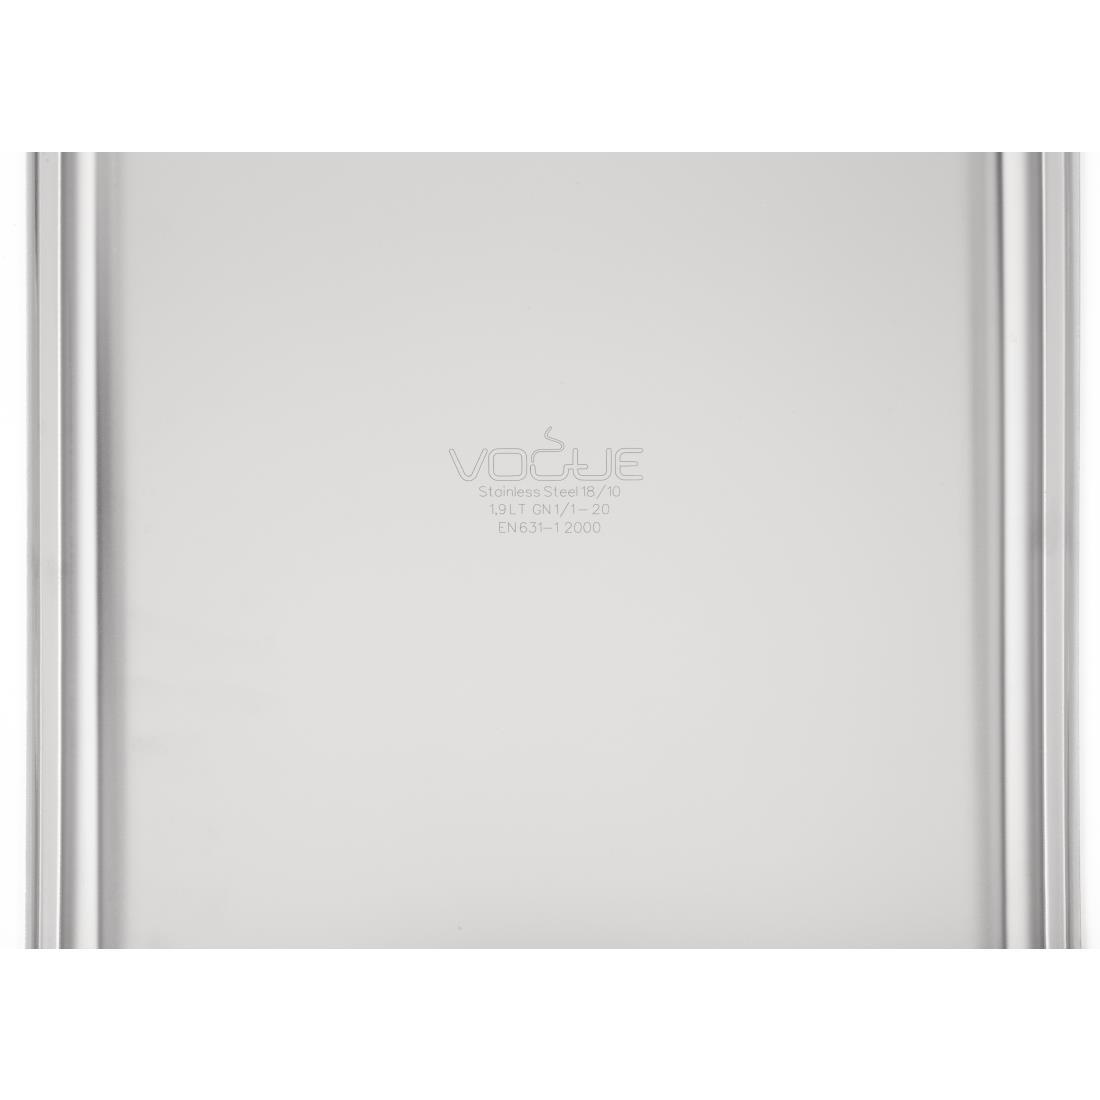 Vogue Heavy Duty Stainless Steel 1/1 Gastronorm Pan 20mm - DW431  - 6